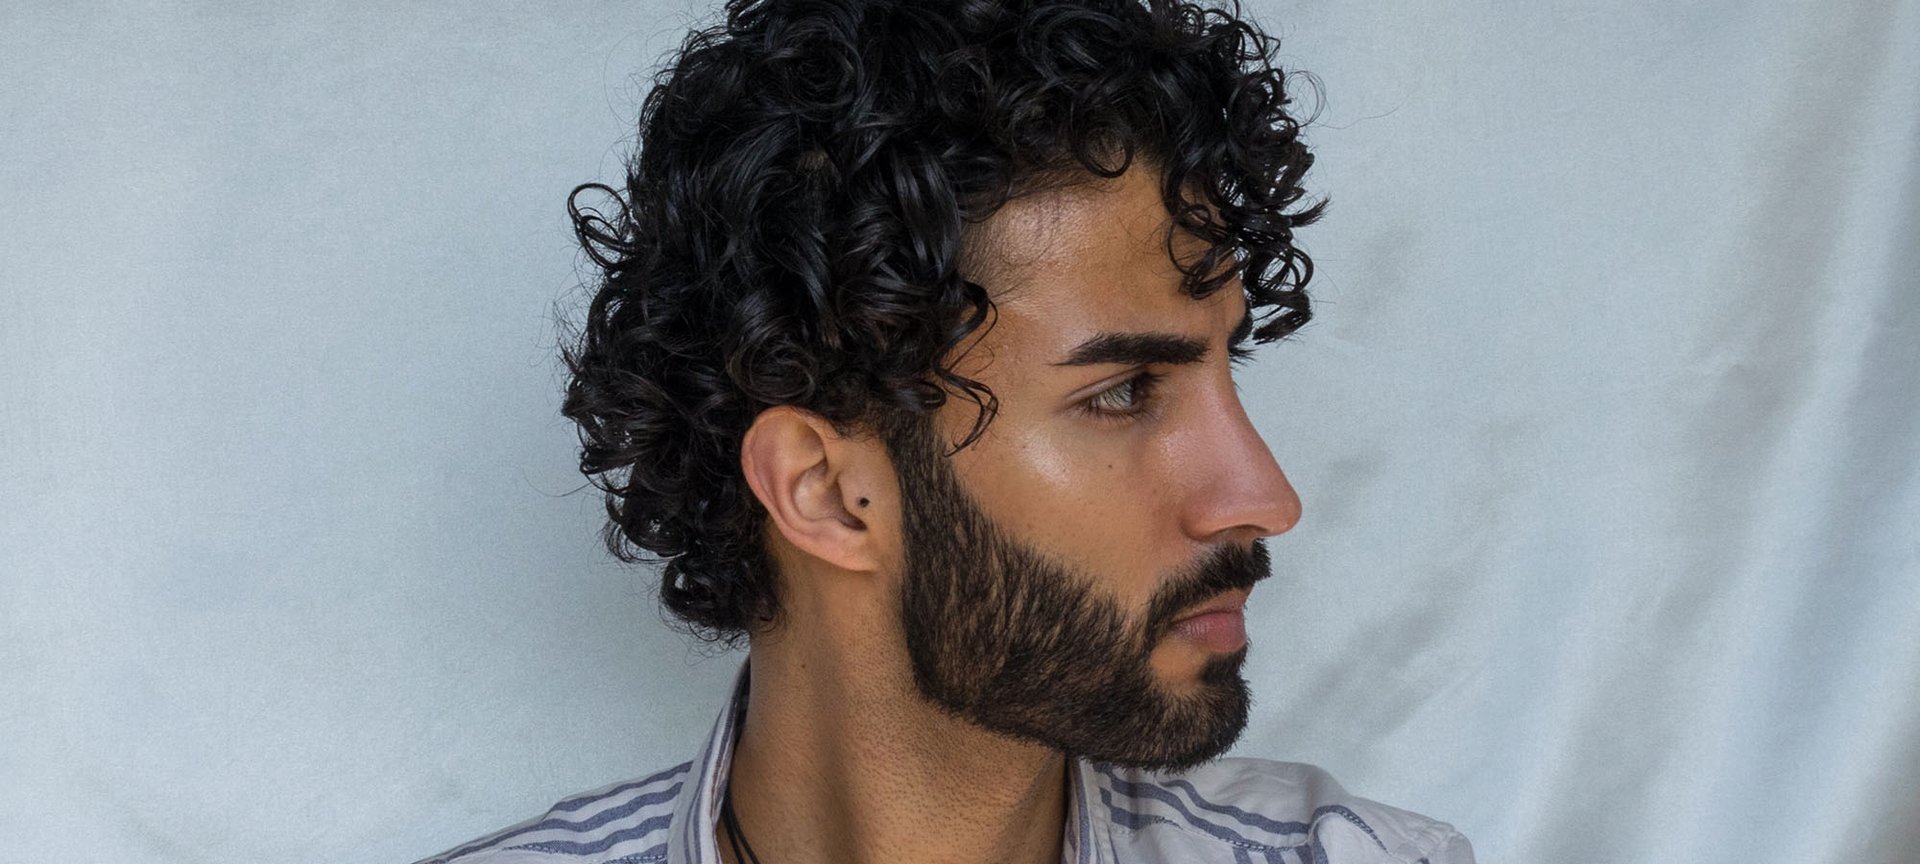 12 Curly and Wavy Perm Hairstyles for Men - L'Oréal Paris